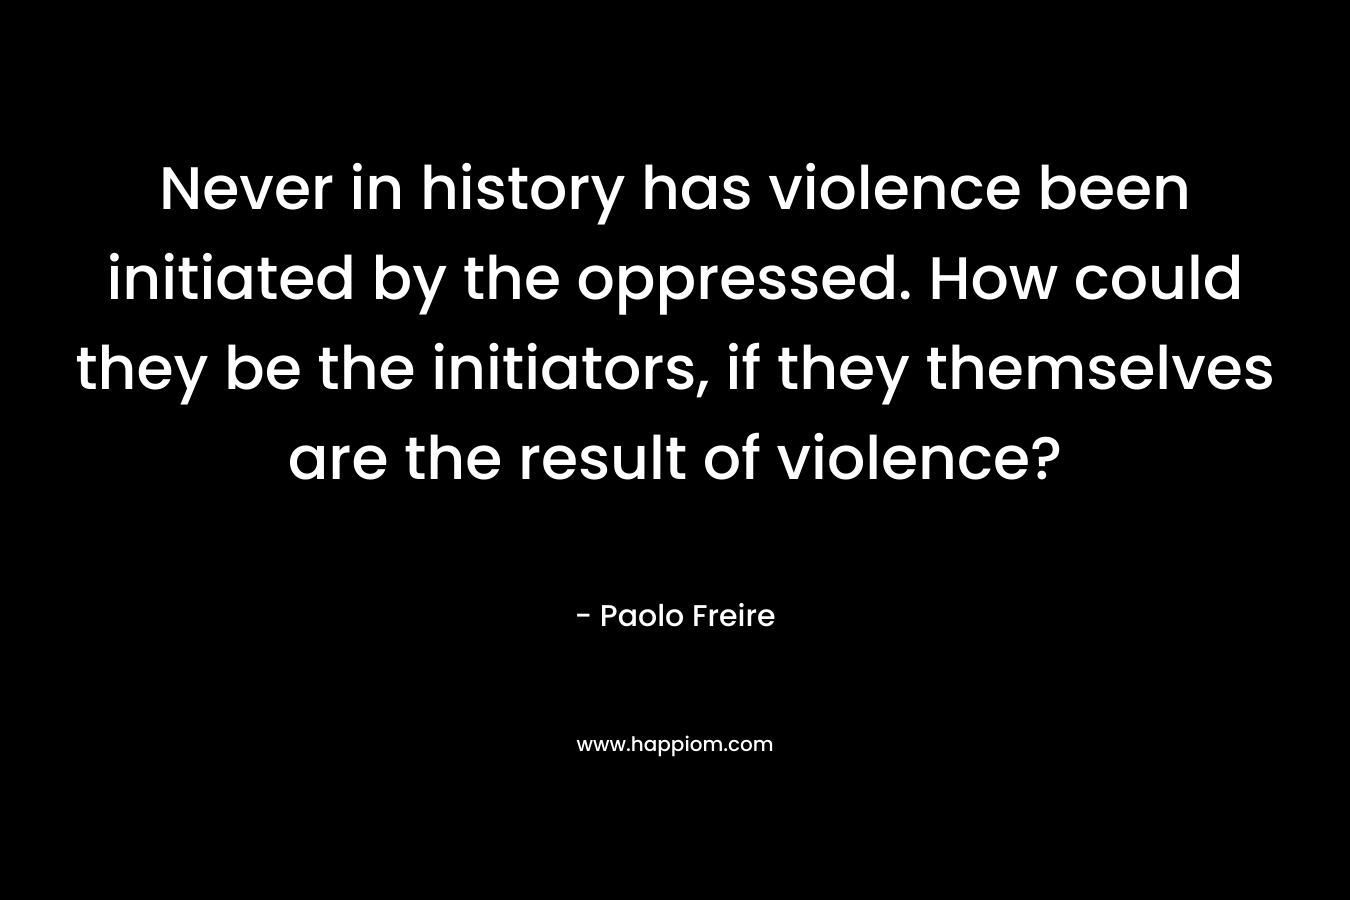 Never in history has violence been initiated by the oppressed. How could they be the initiators, if they themselves are the result of violence?